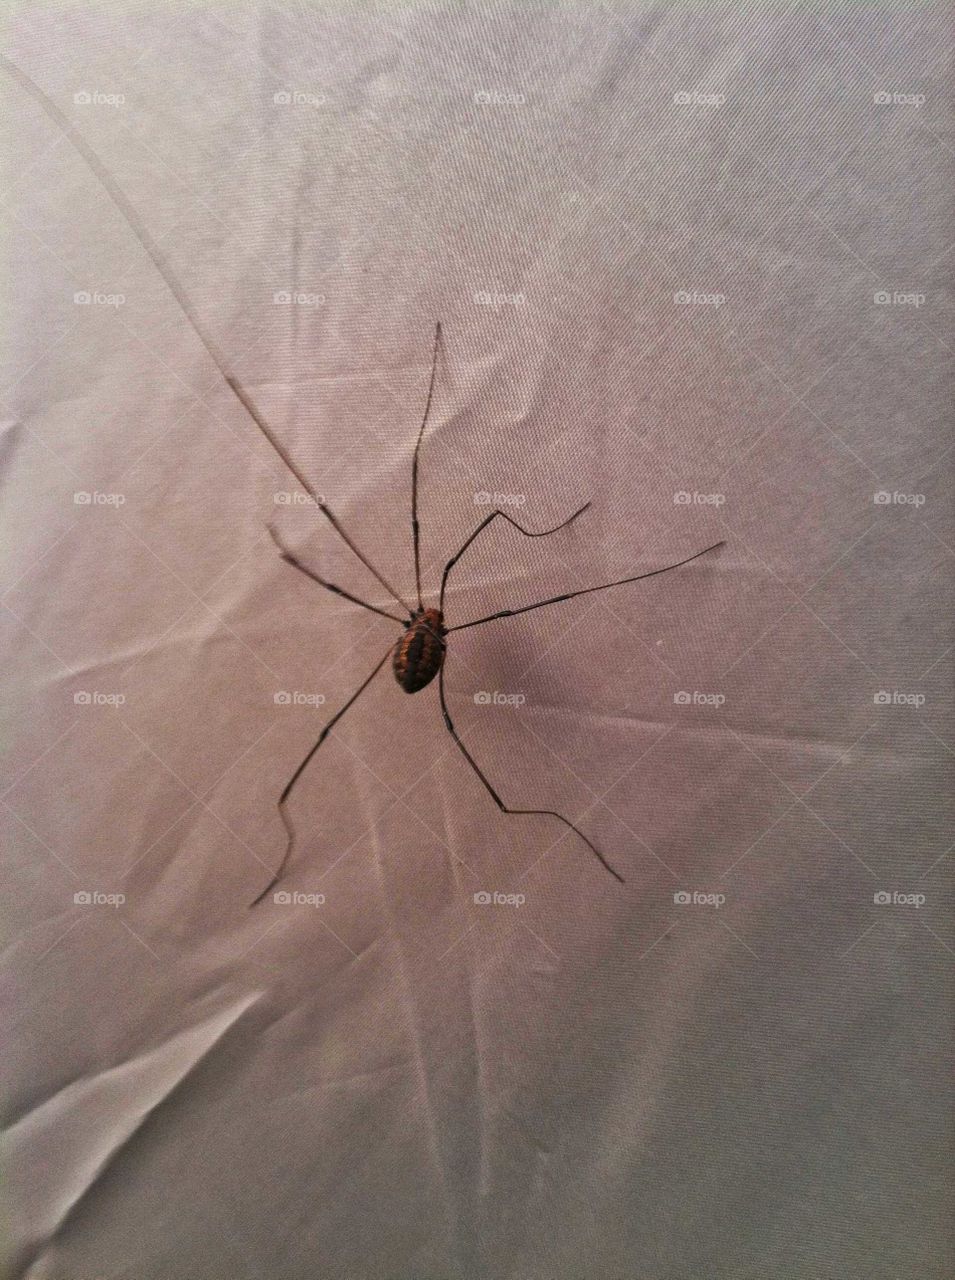 spider on tent wall